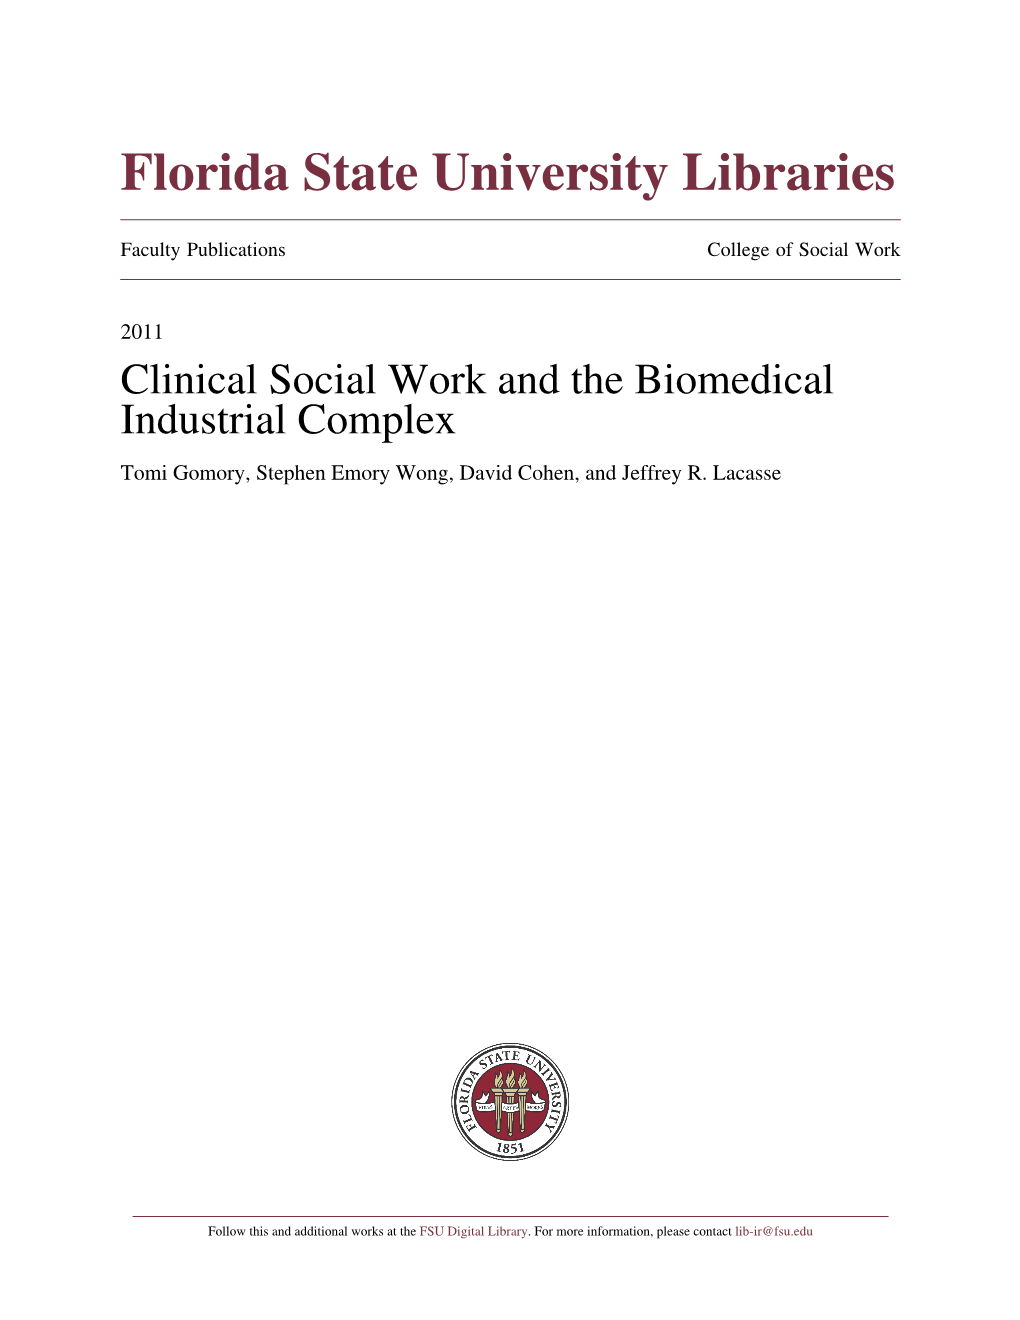 Clinical Social Work and the Biomedical Industrial Complex Tomi Gomory, Stephen Emory Wong, David Cohen, and Jeffrey R